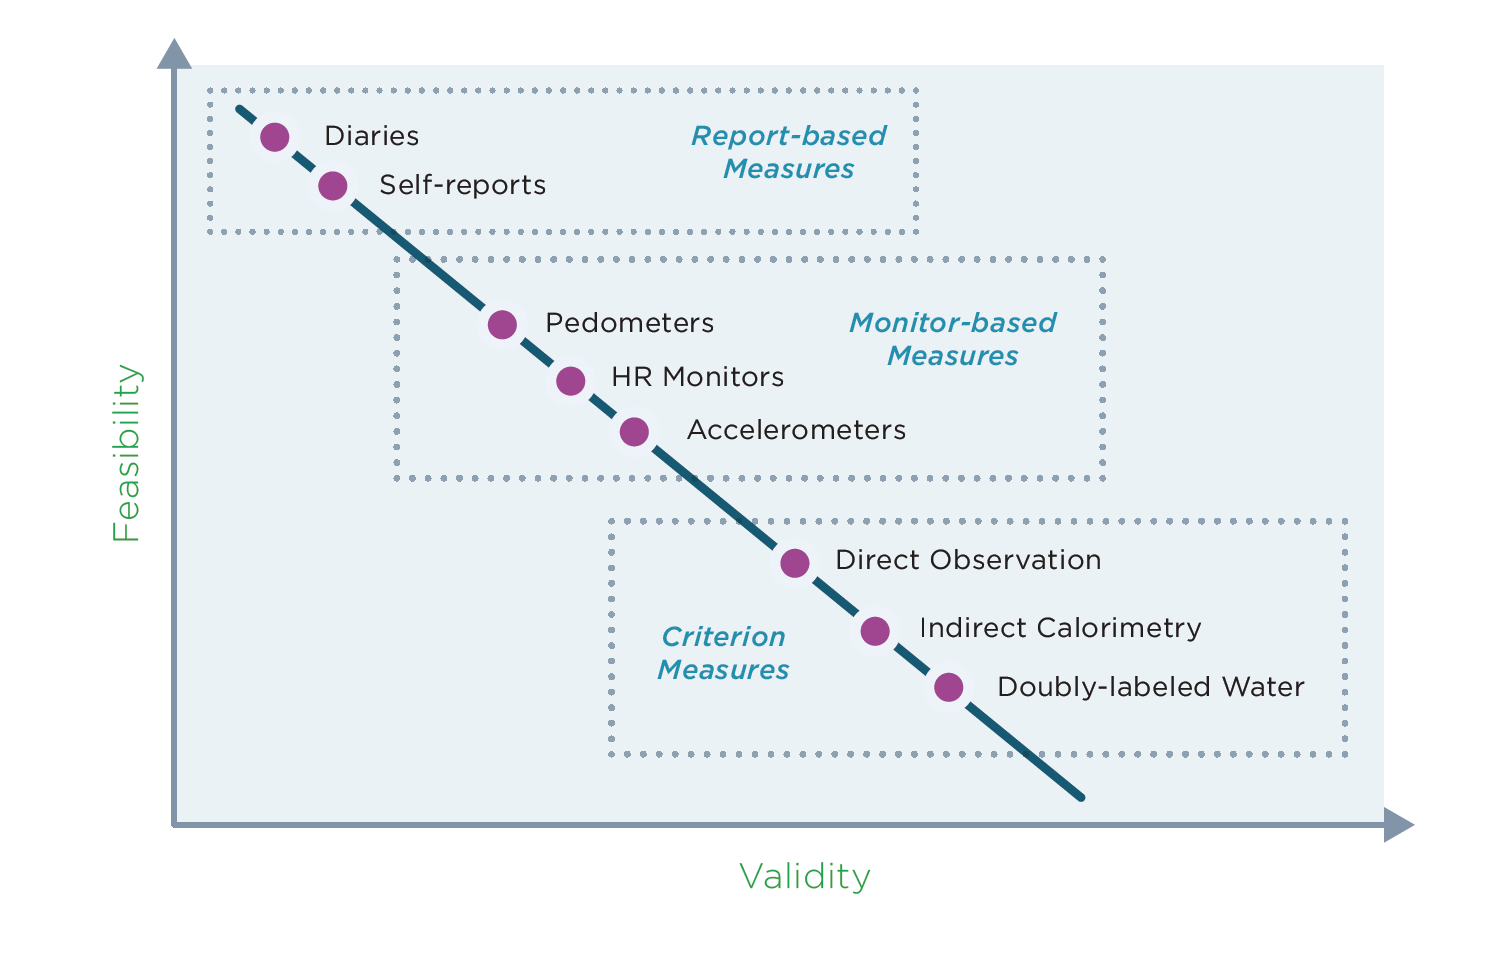 Figure 5a: Physical Activity Assessment Tools and Their Relative Positions on the Feasibility/Validity Continuum